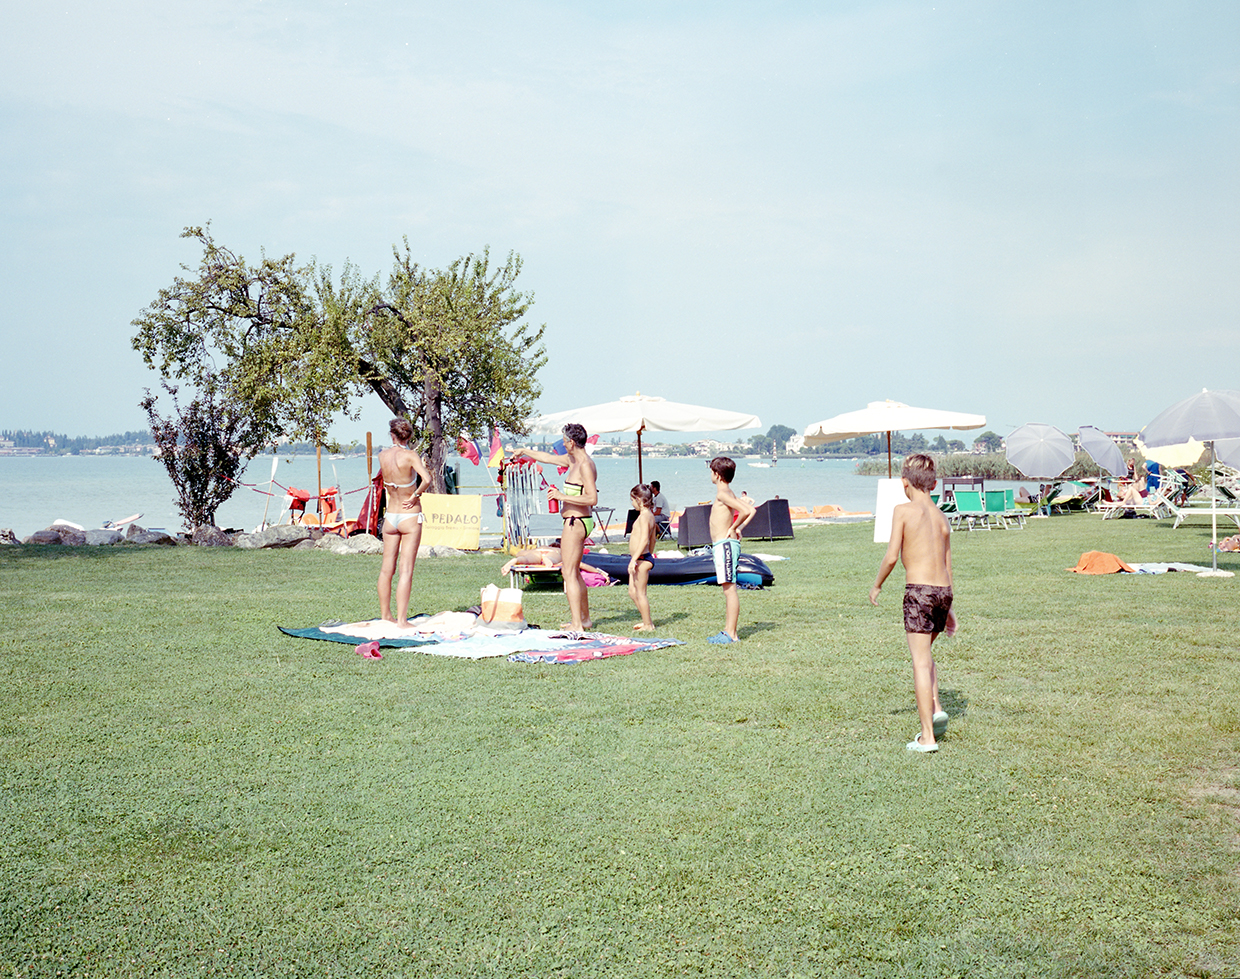  Colombare, 2017, Italy
Families during the last days of summer holidays on the shores of the lake in Colombare 